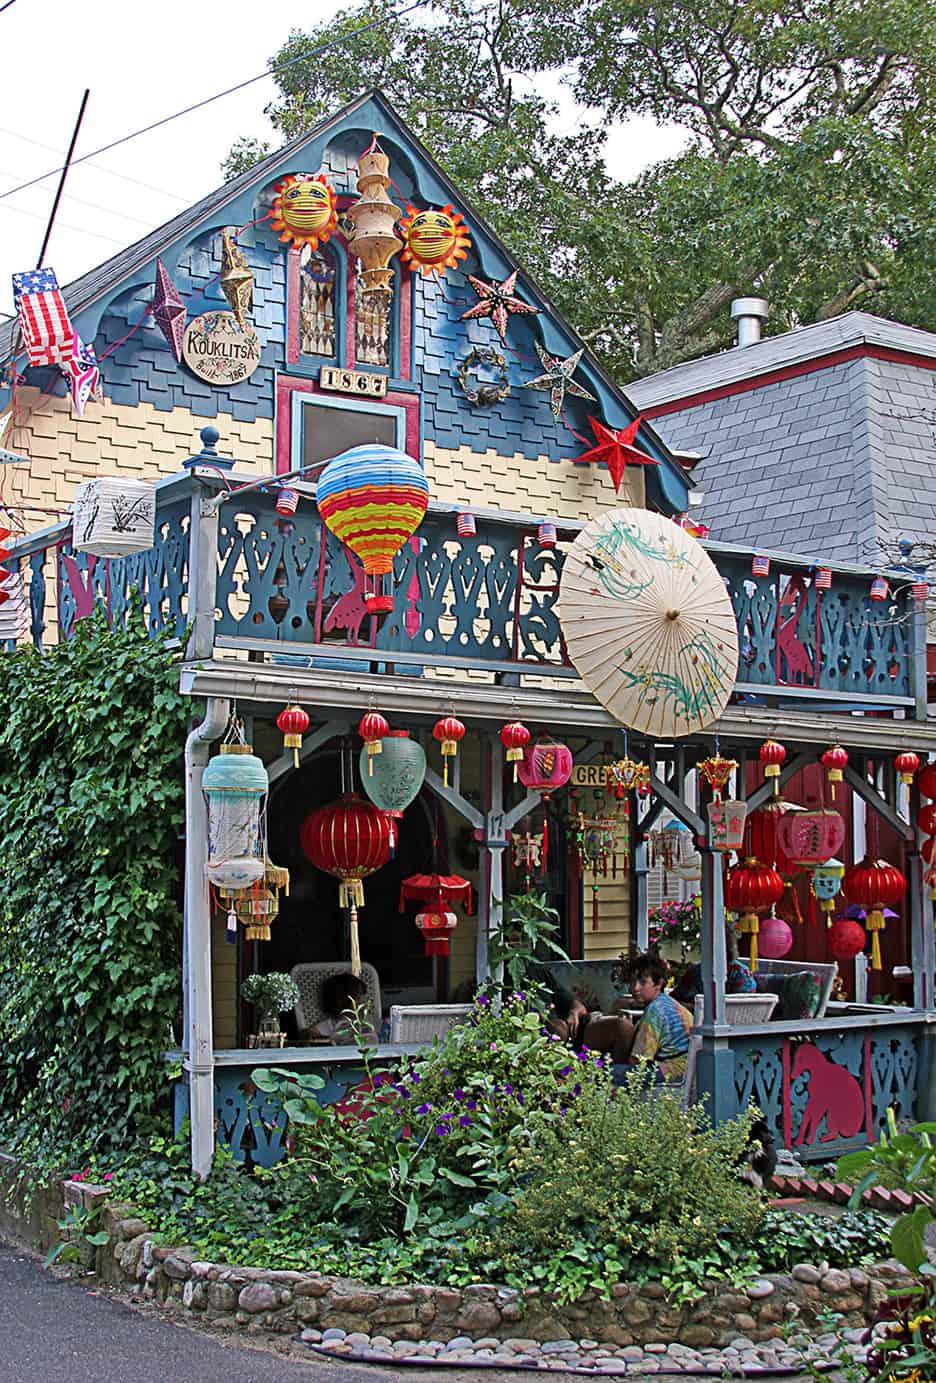 At Illumination in Oak Bluffs the already charming Victorian cottages are decked out in all manners of paper lanterns and parasols. Some are new and others quite old. They are as colorful and magical in the daytime, before they are lit, as they are in the darkness once the signal is given to illuminate!